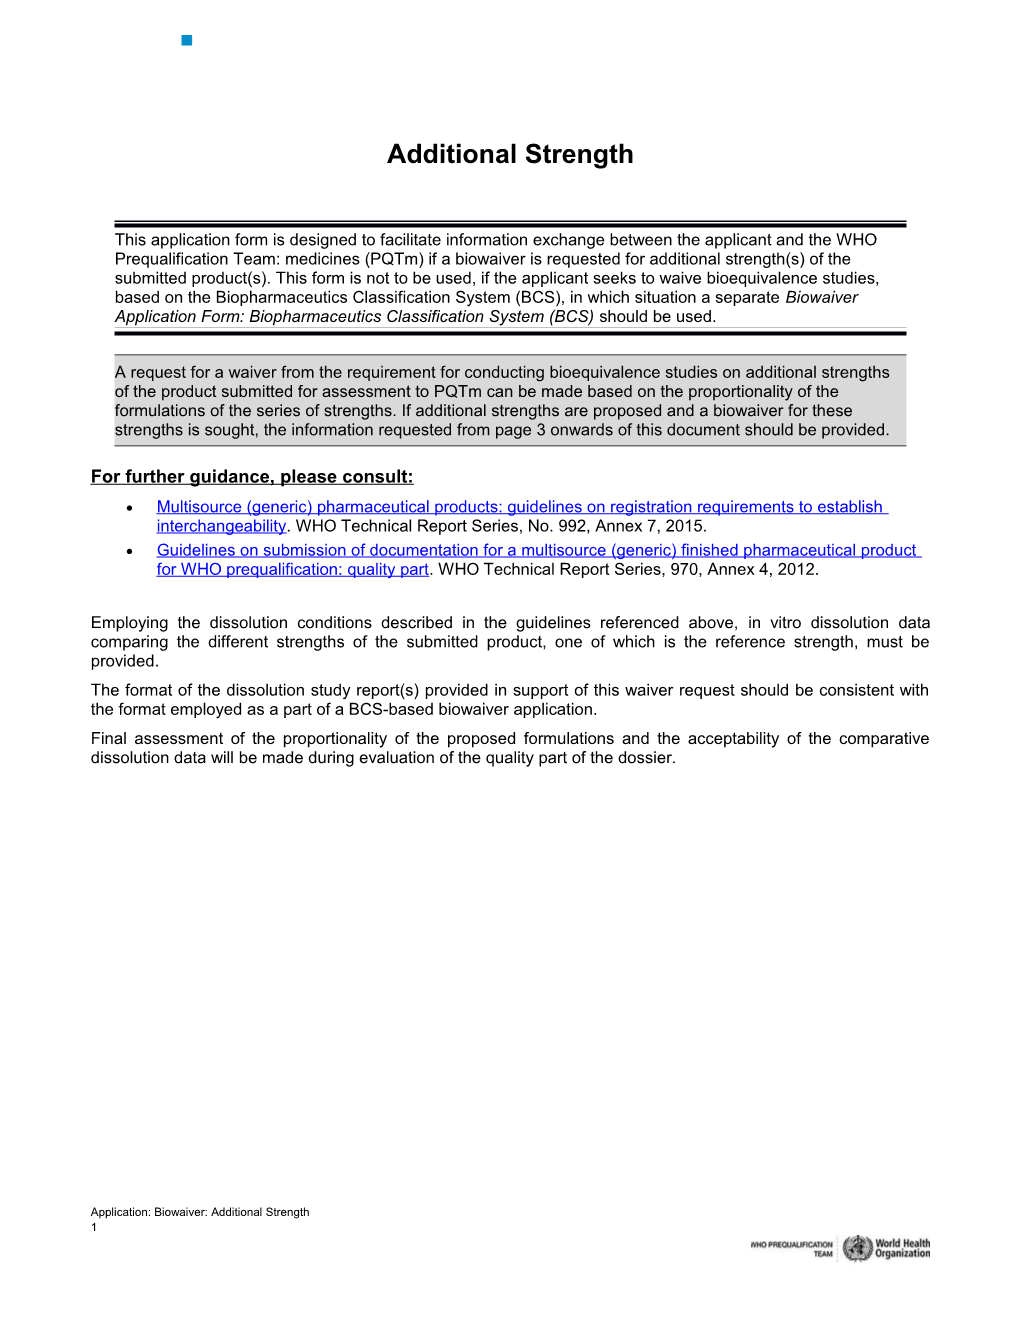 Application for a Biowaiver: Additional Strength